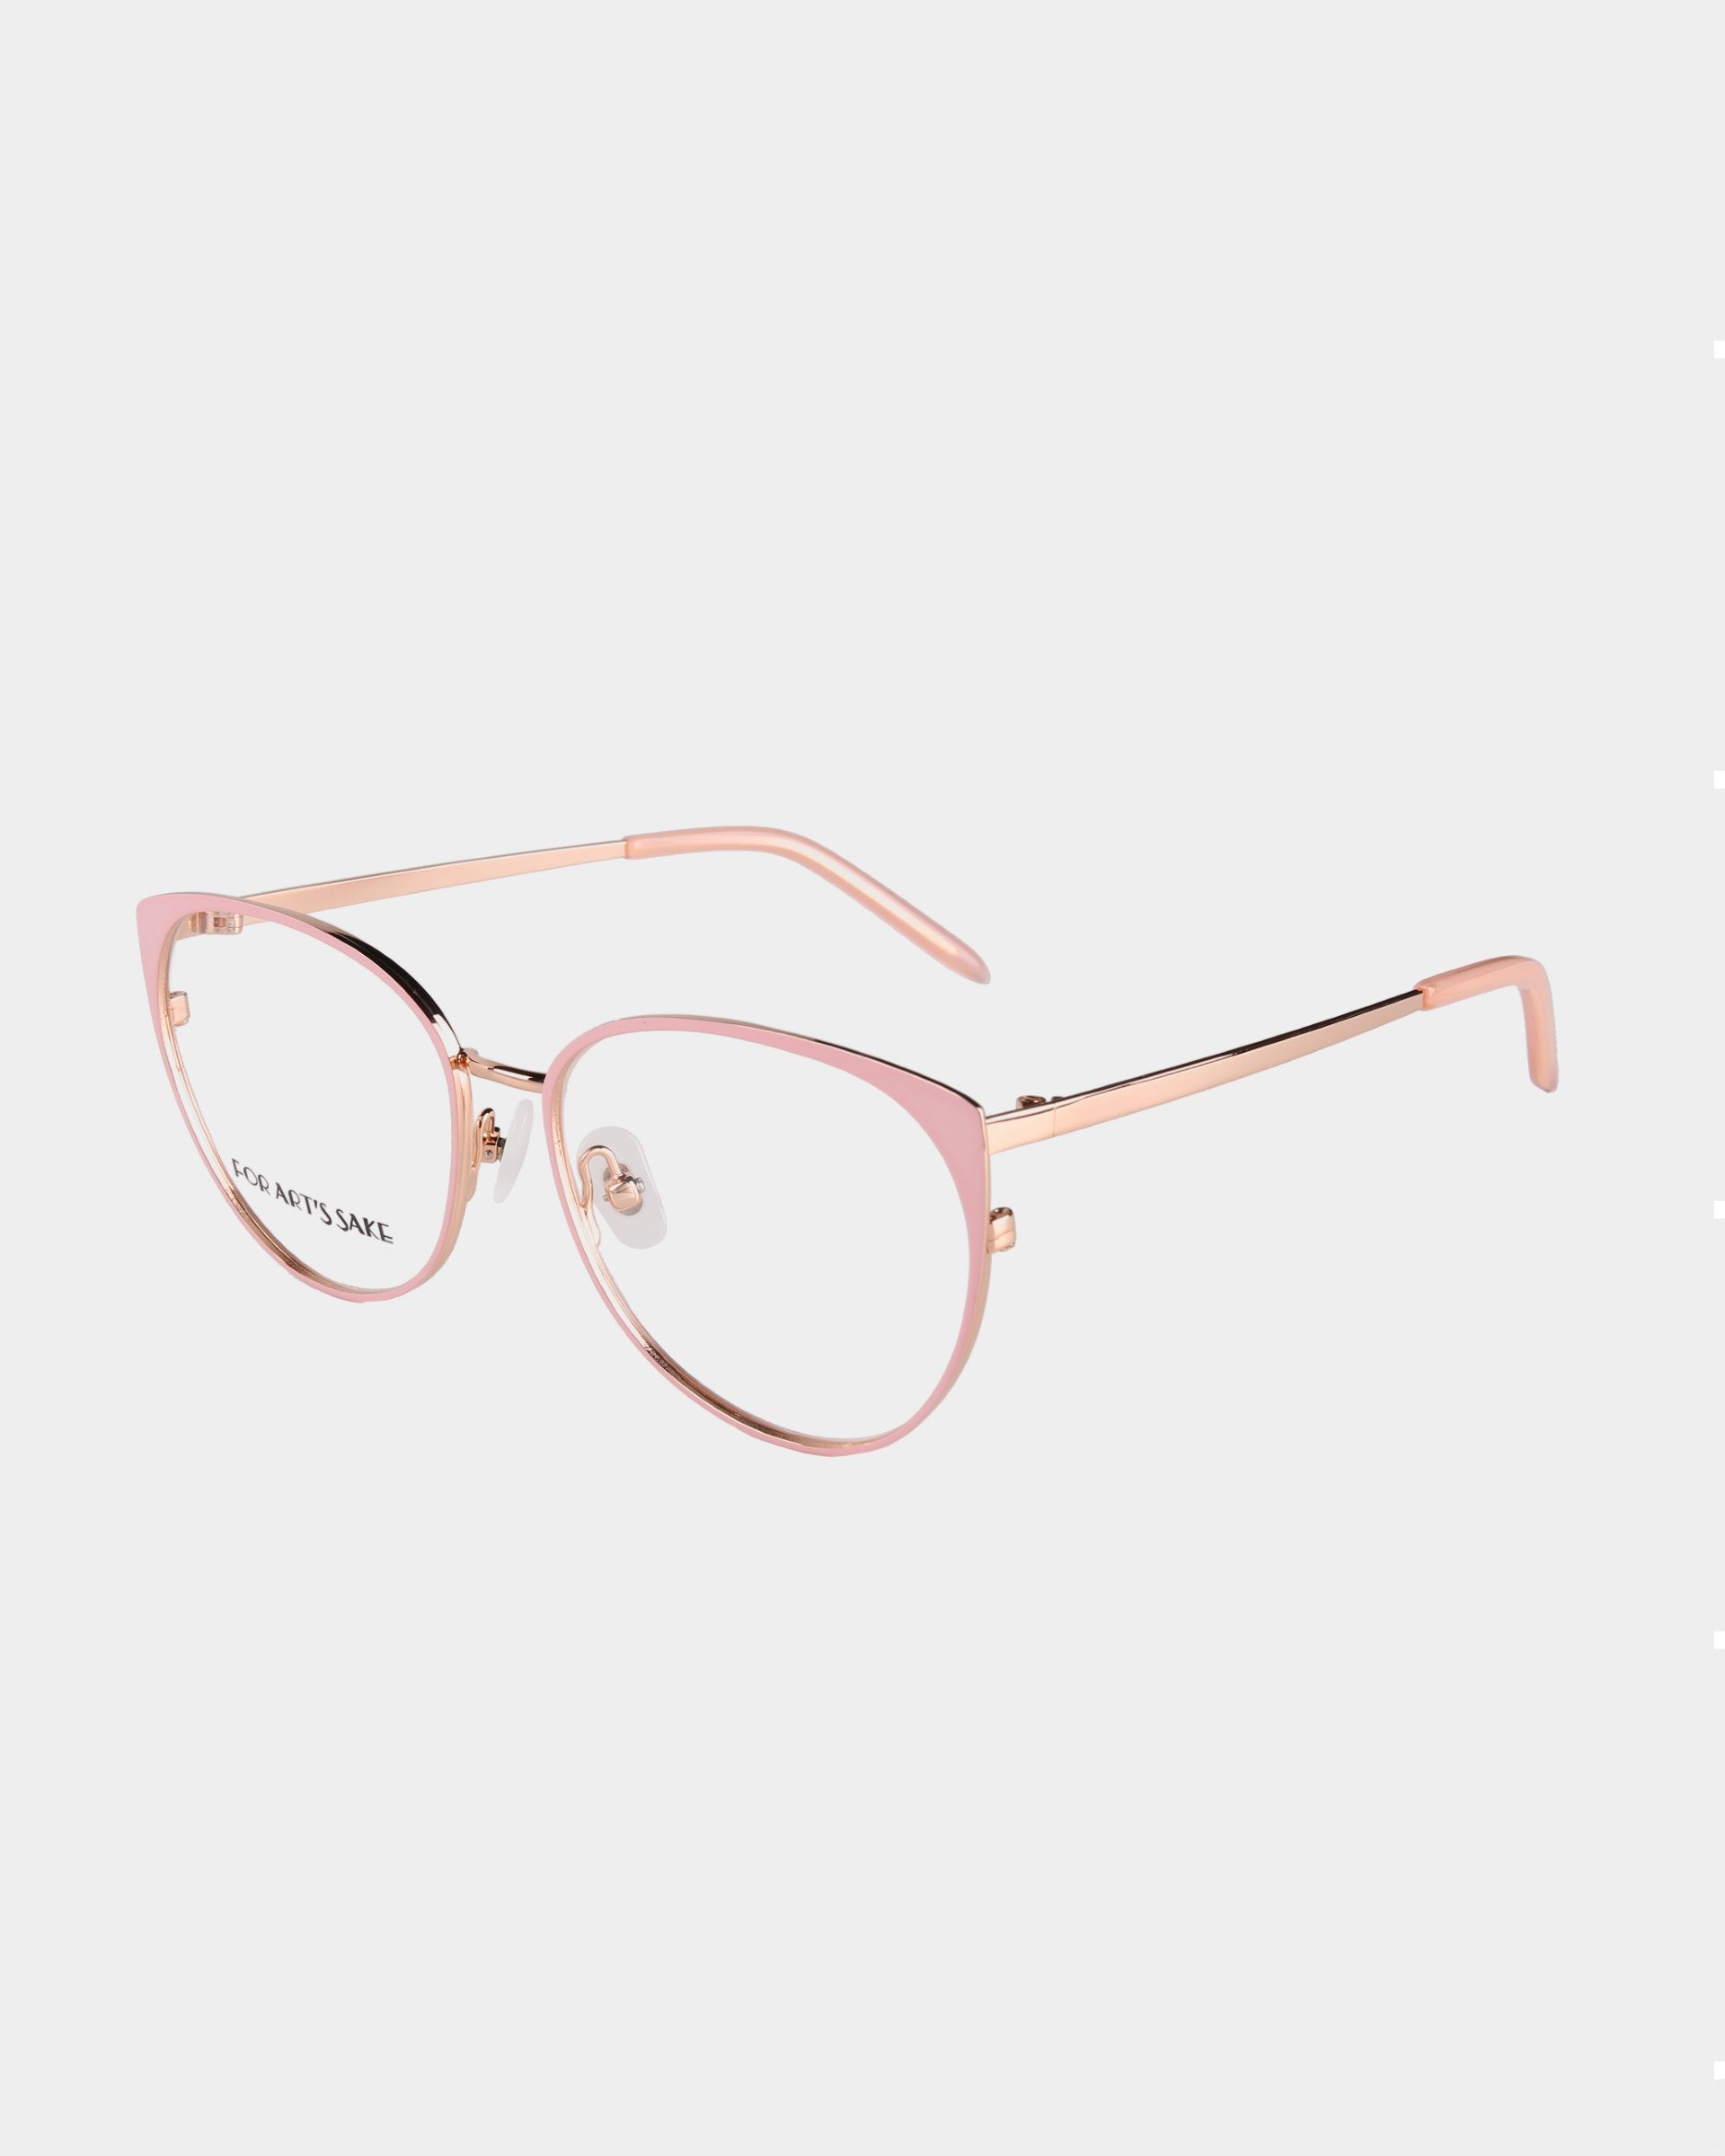 A pair of stylish Kaia by For Art's Sake® with pink metal cat-eye frames and transparent lenses, featuring blue light filter technology. The temples are slender with a metallic finish that complements the frame color, while the white background enhances the simplicity and elegance of the design.